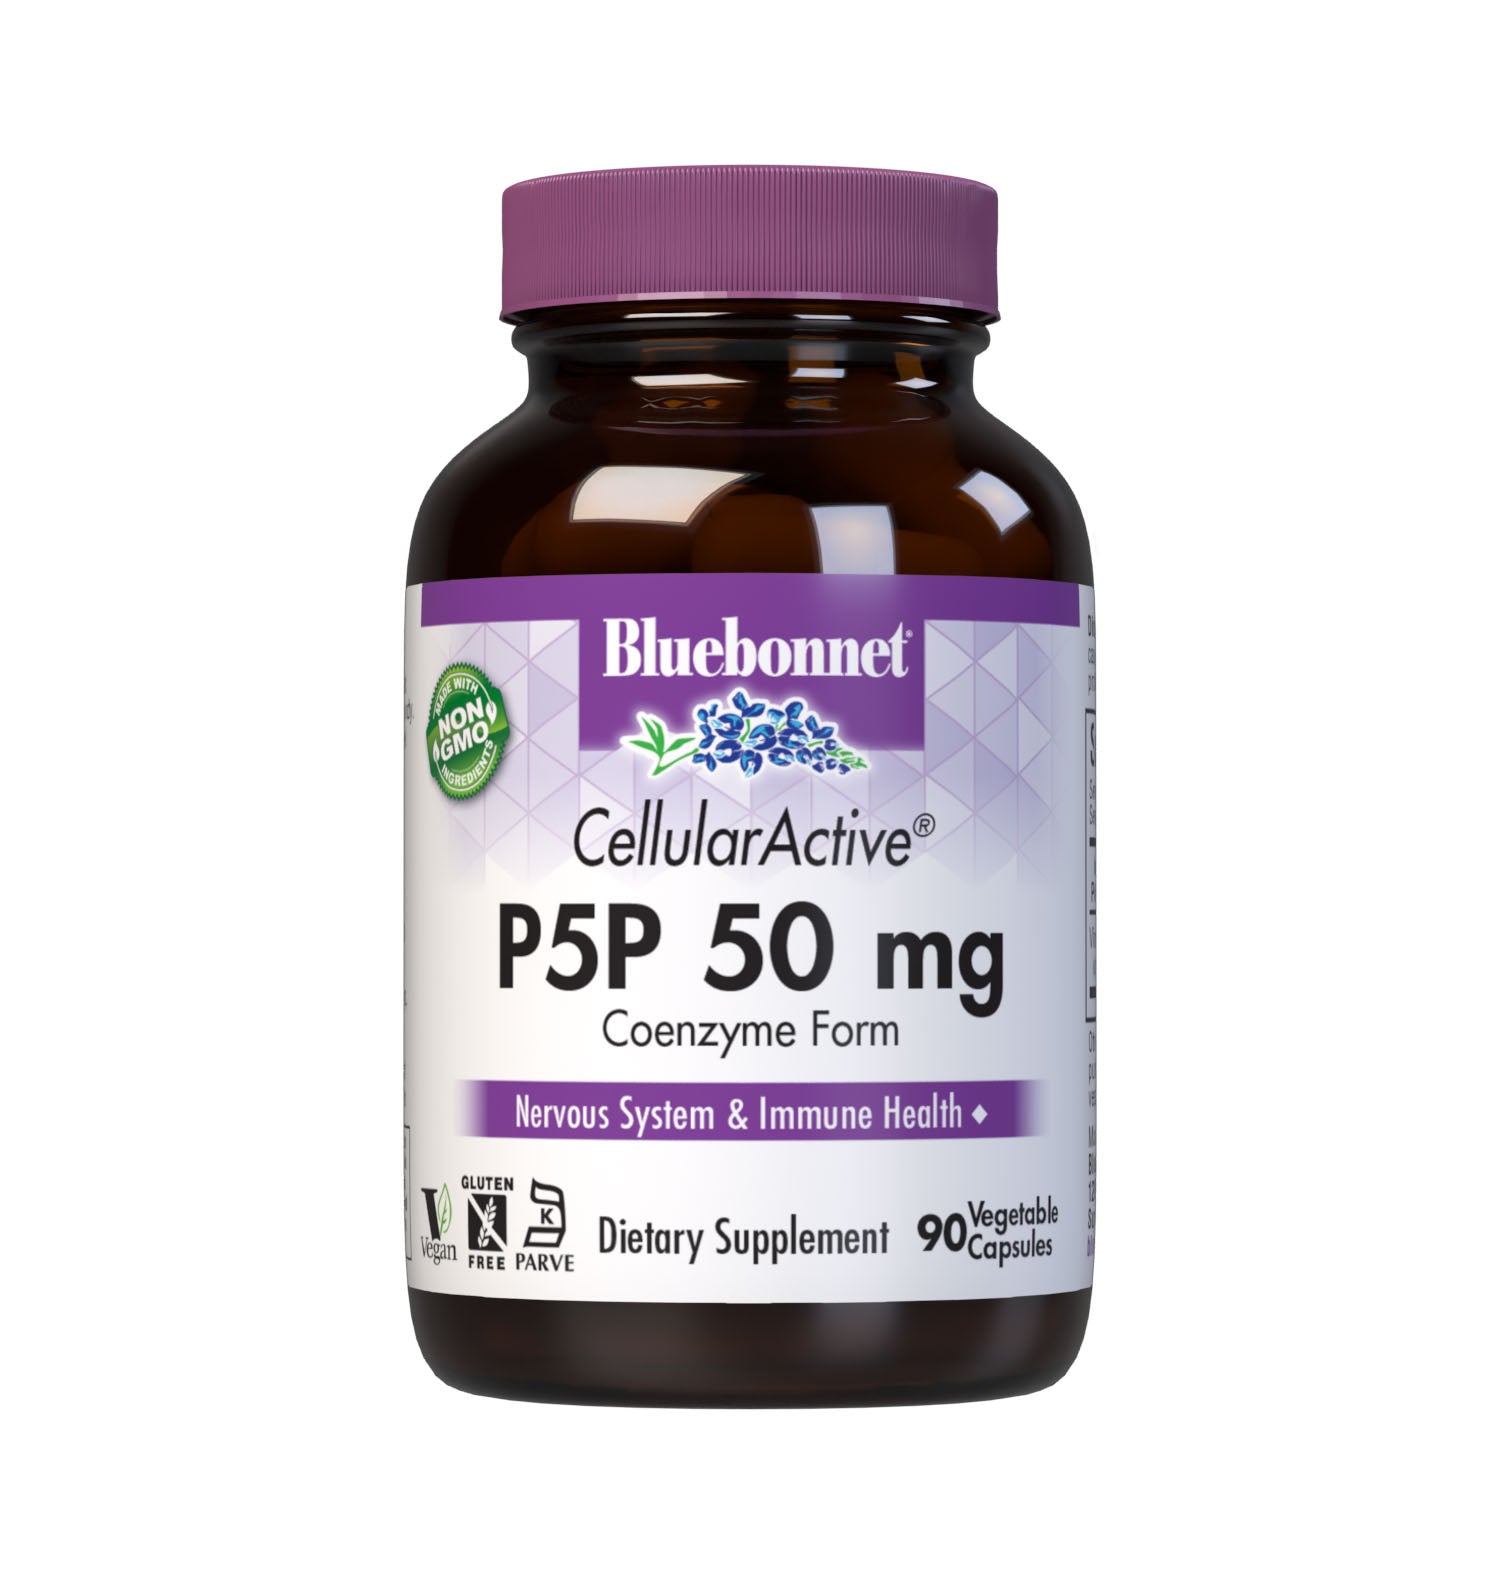 Bluebonnet’s CellularActive® P5P 50 mg Vegetable Capsules are formulated with the active, coenzyme form of vitamin B6 as pyridoxal-5-phosphate, which is better absorbed, retained and utilized in the body. Vitamin B6 helps support cellular energy production as well as nervous and immune system health. #size_90 count